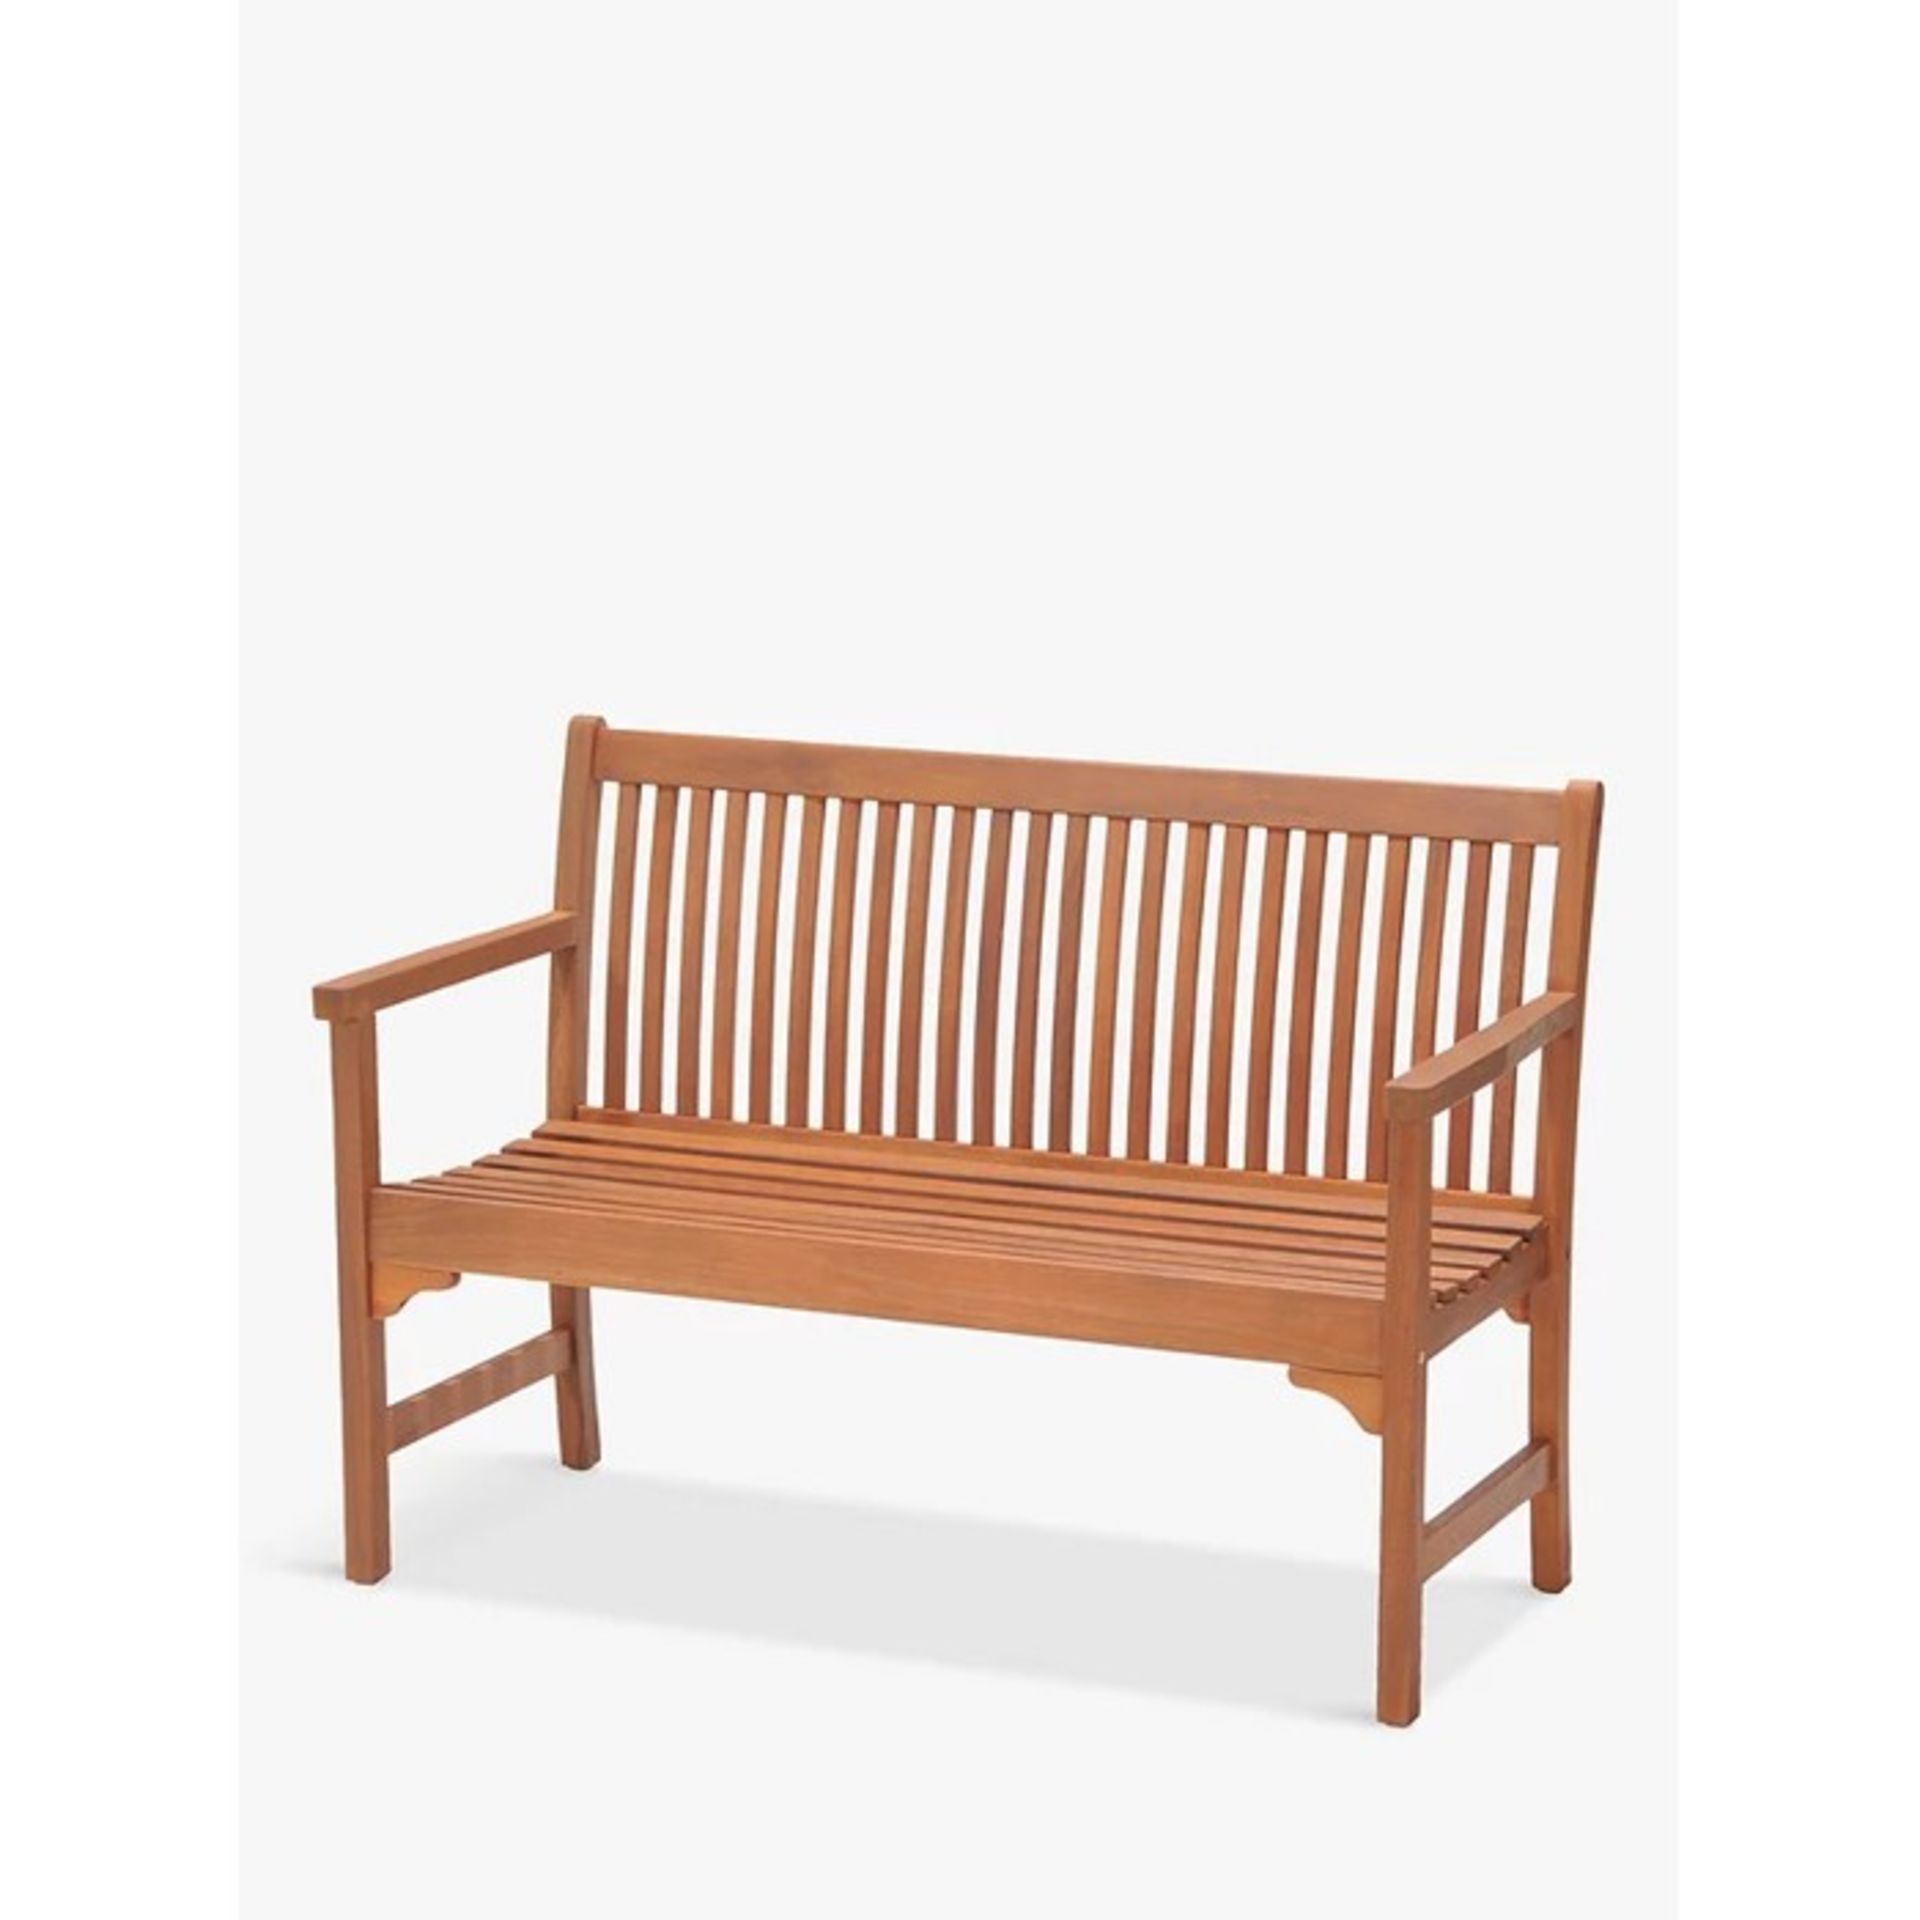 PALLET TO CONTAIN 5 X BRAND NEW JOHN LEWIS 2-Seater Garden Bench, FSC-Certified (Eucalyptus Wood), - Image 3 of 3